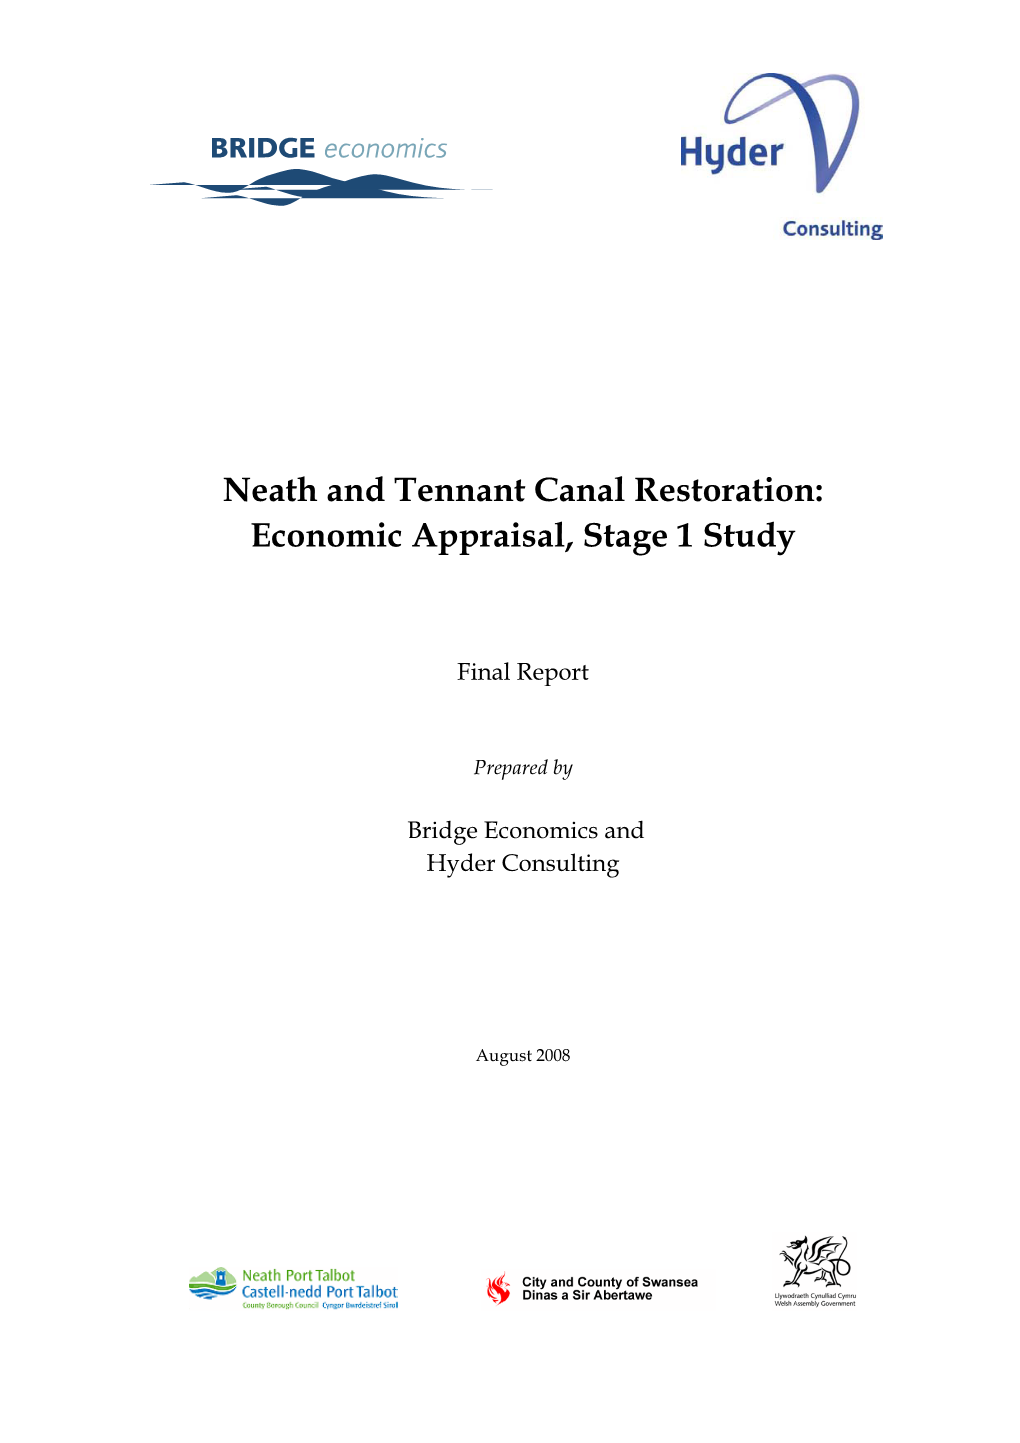 Neath and Tennant Canal Restoration: Economic Appraisal, Stage 1 Study